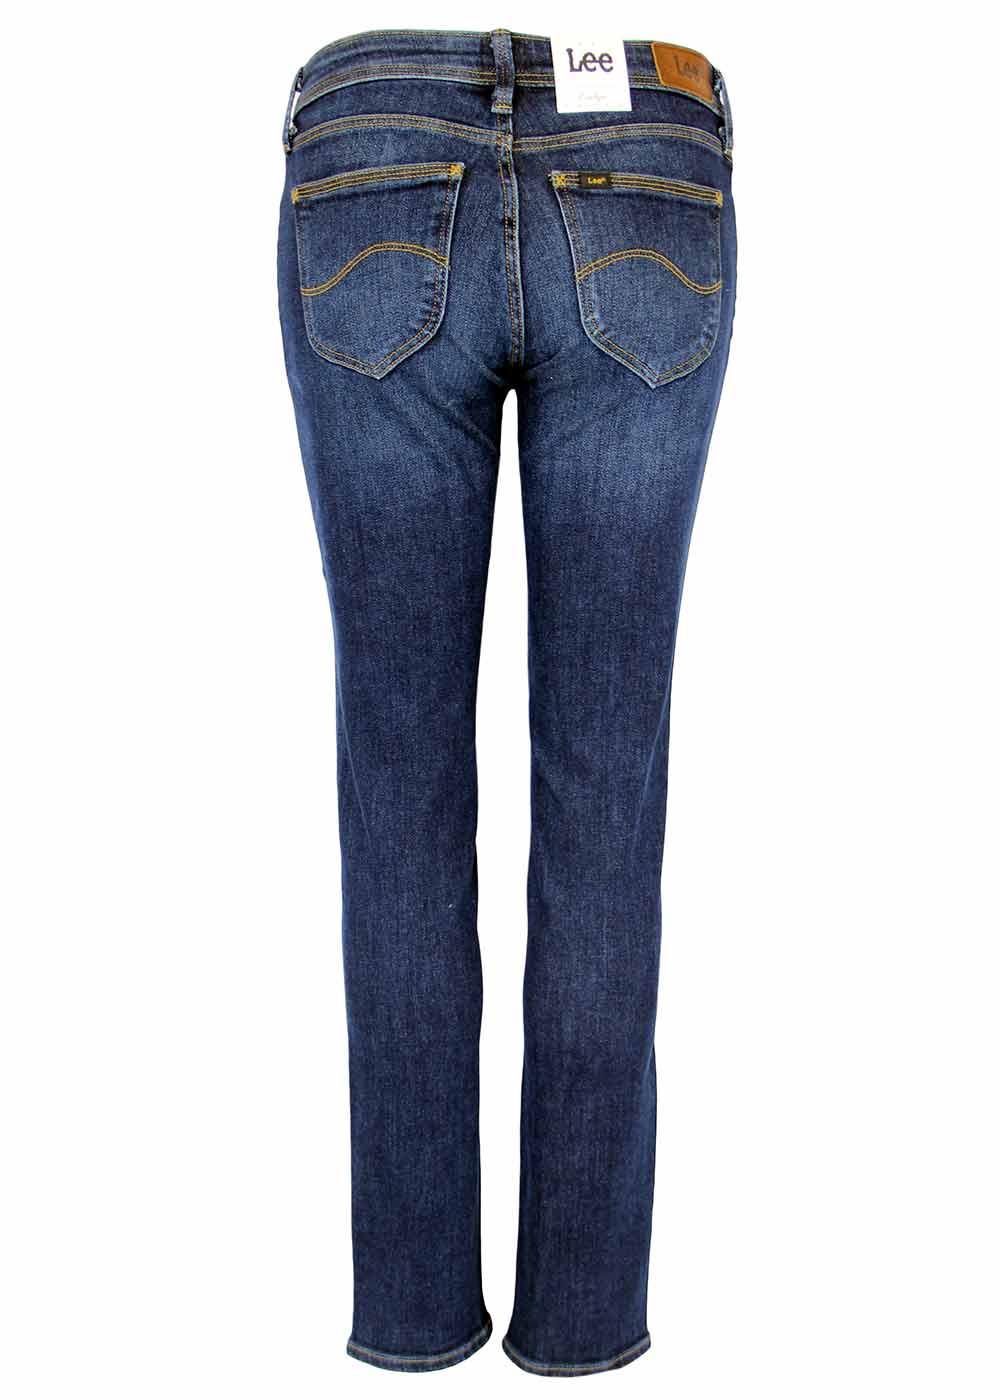 Emlyn LEE Retro Indie Straight Tapered Fit Denim Jeans Blue Notes